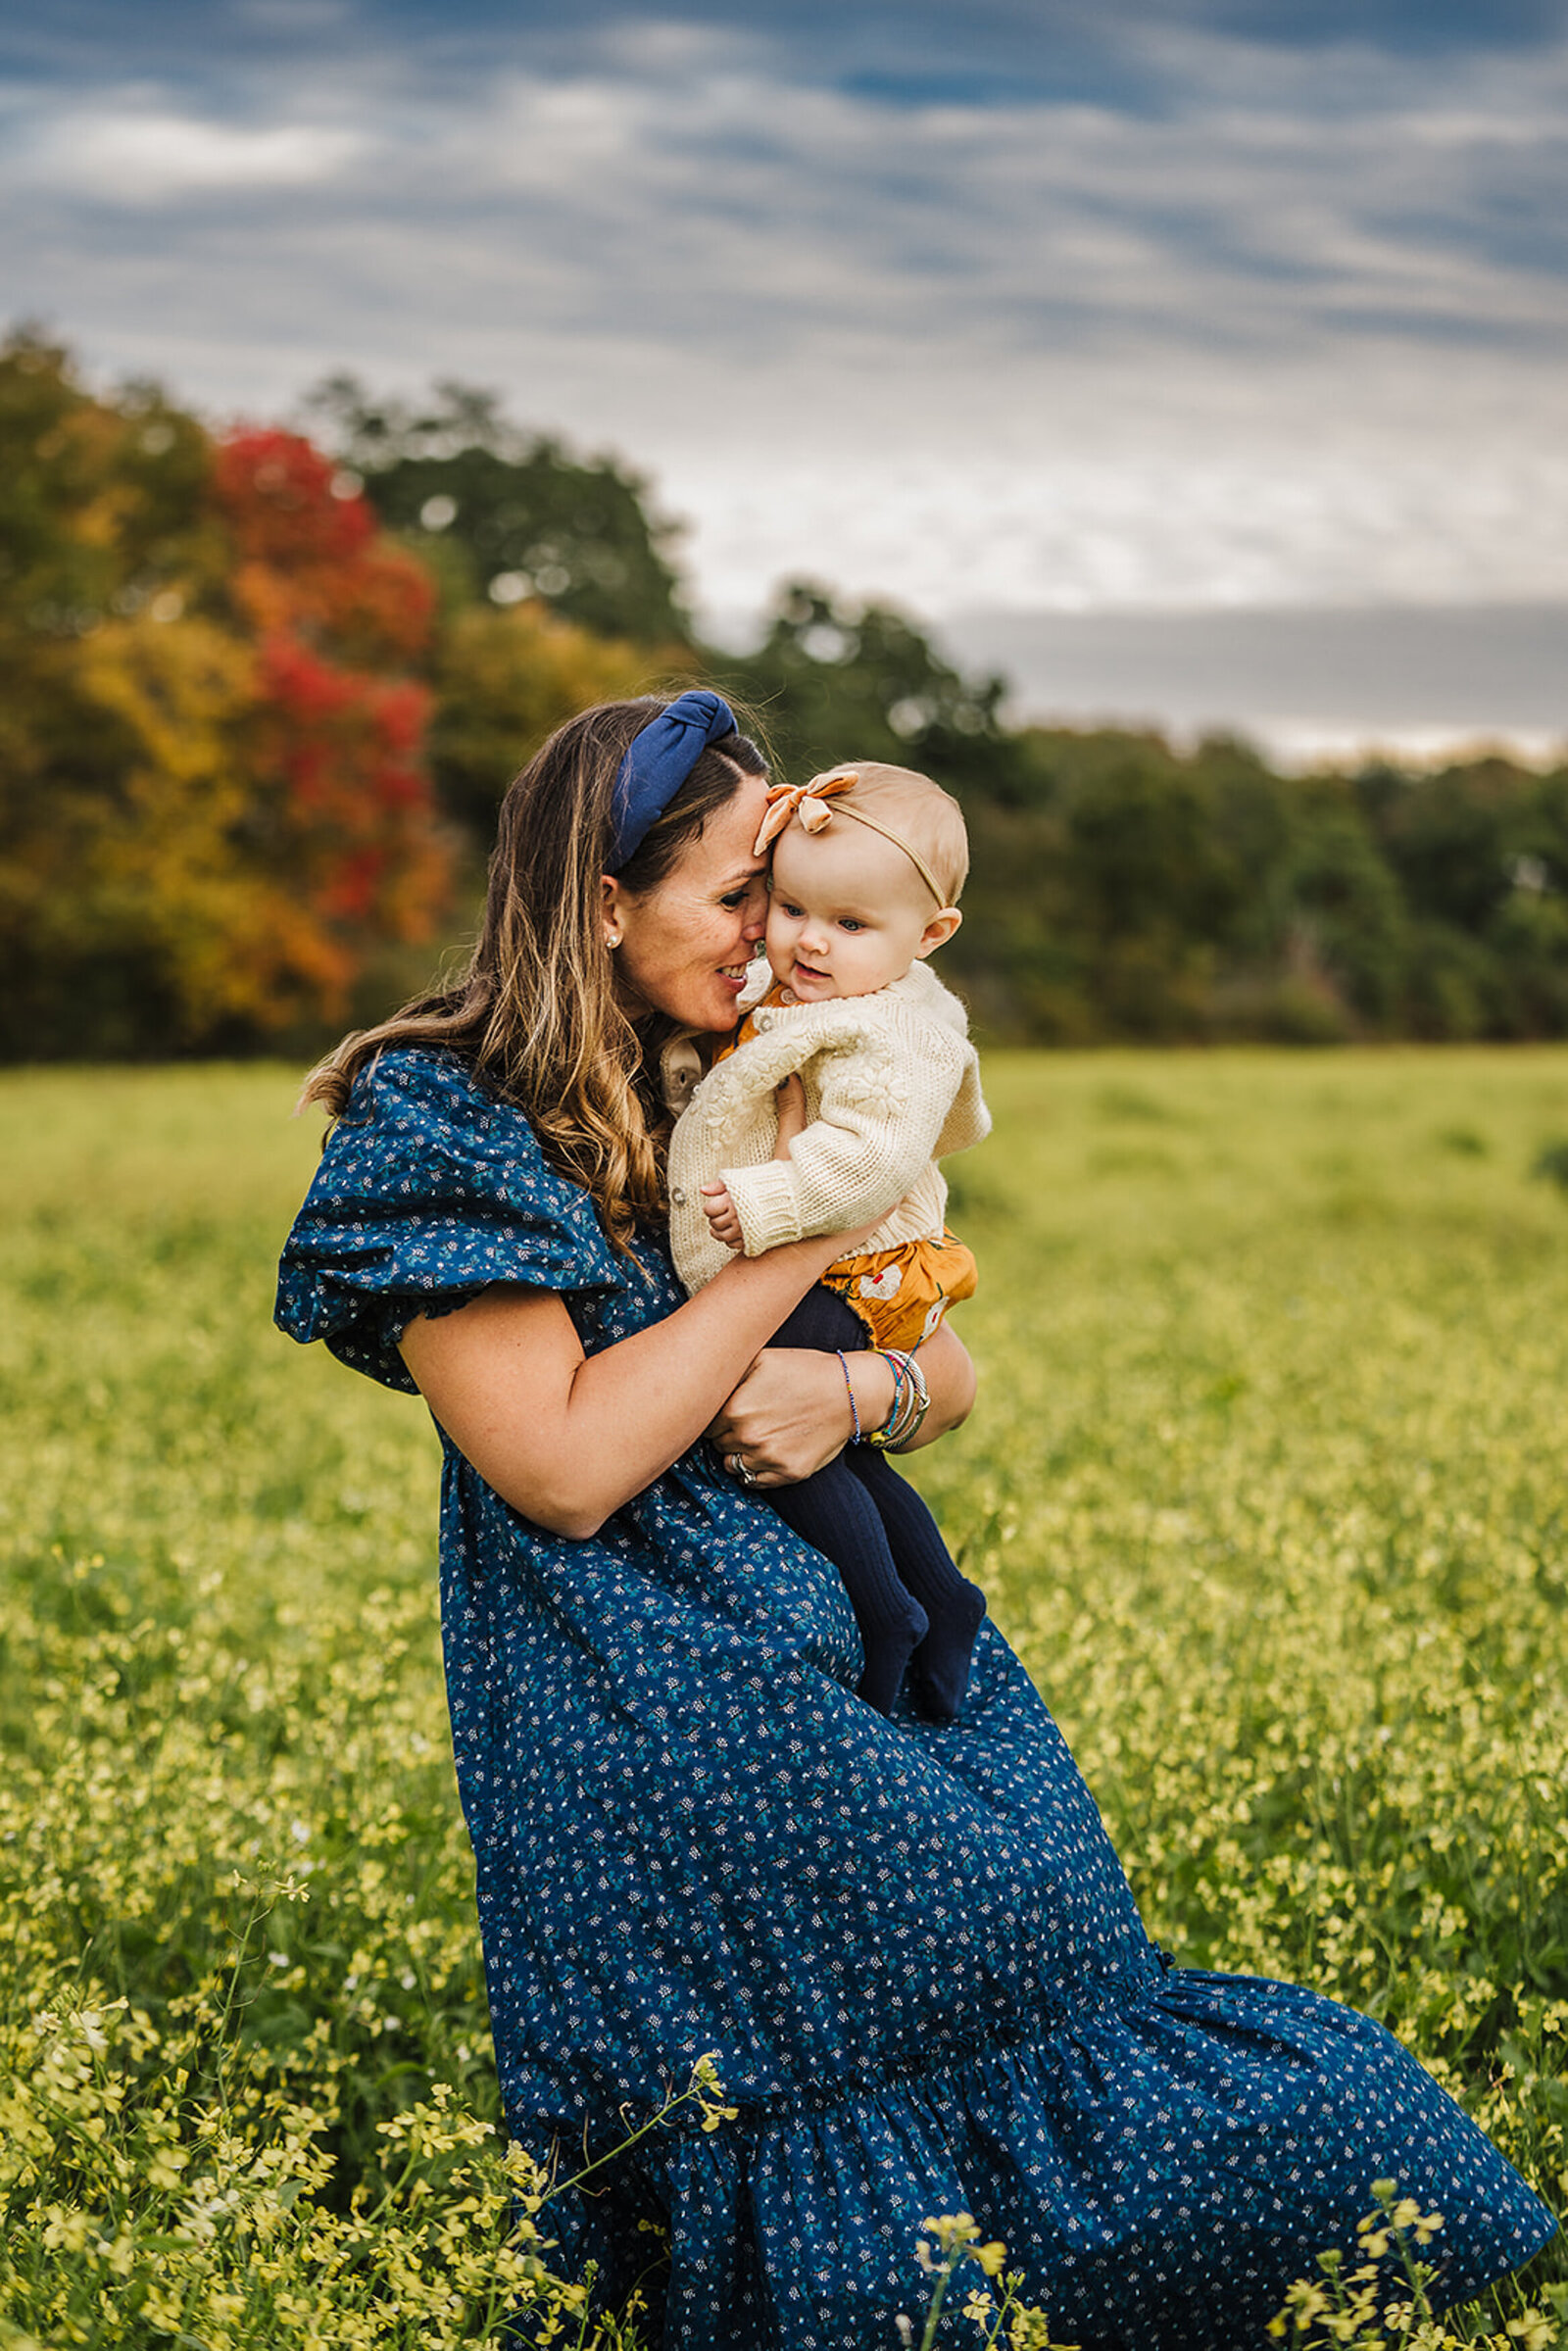 mom in blue dress snuggles baby in field of yellow flowers